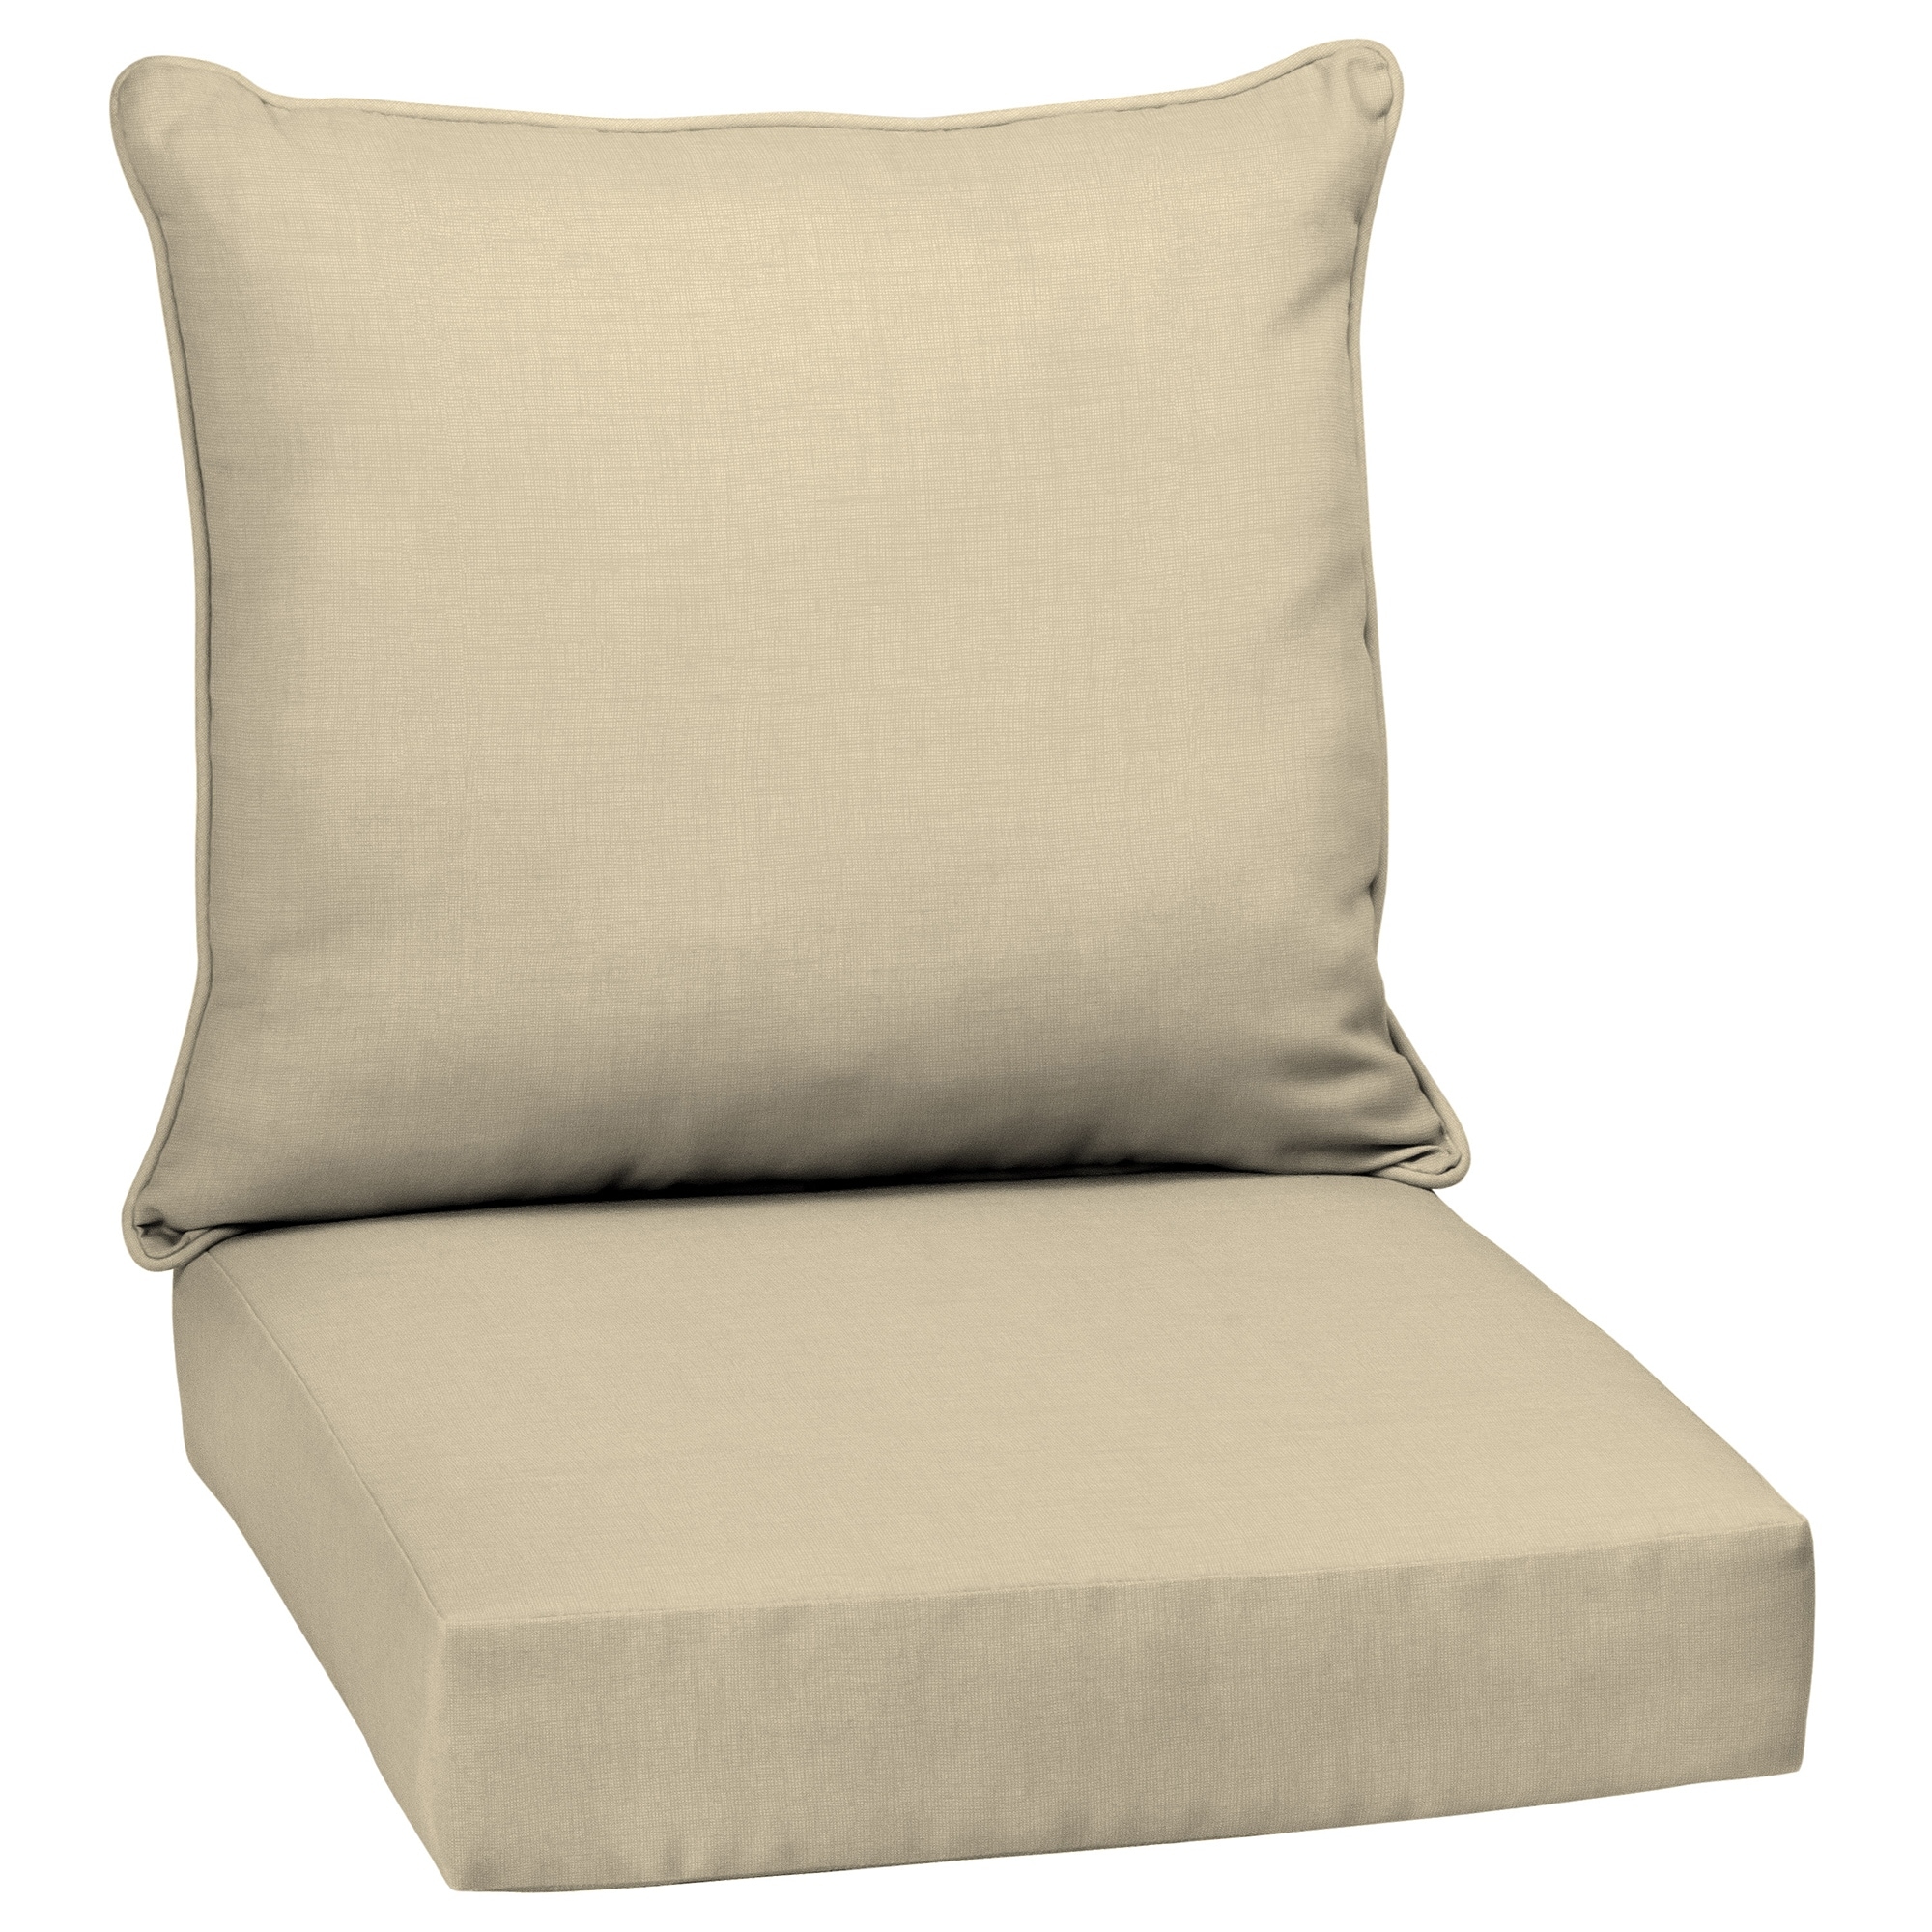 https://ak1.ostkcdn.com/images/products/is/images/direct/94b24492630de8f5cb49782b6e7255ae0d19c218/Arden-Selections-Tan-Outdoor-Deep-Seat-Cushion-Set.jpg